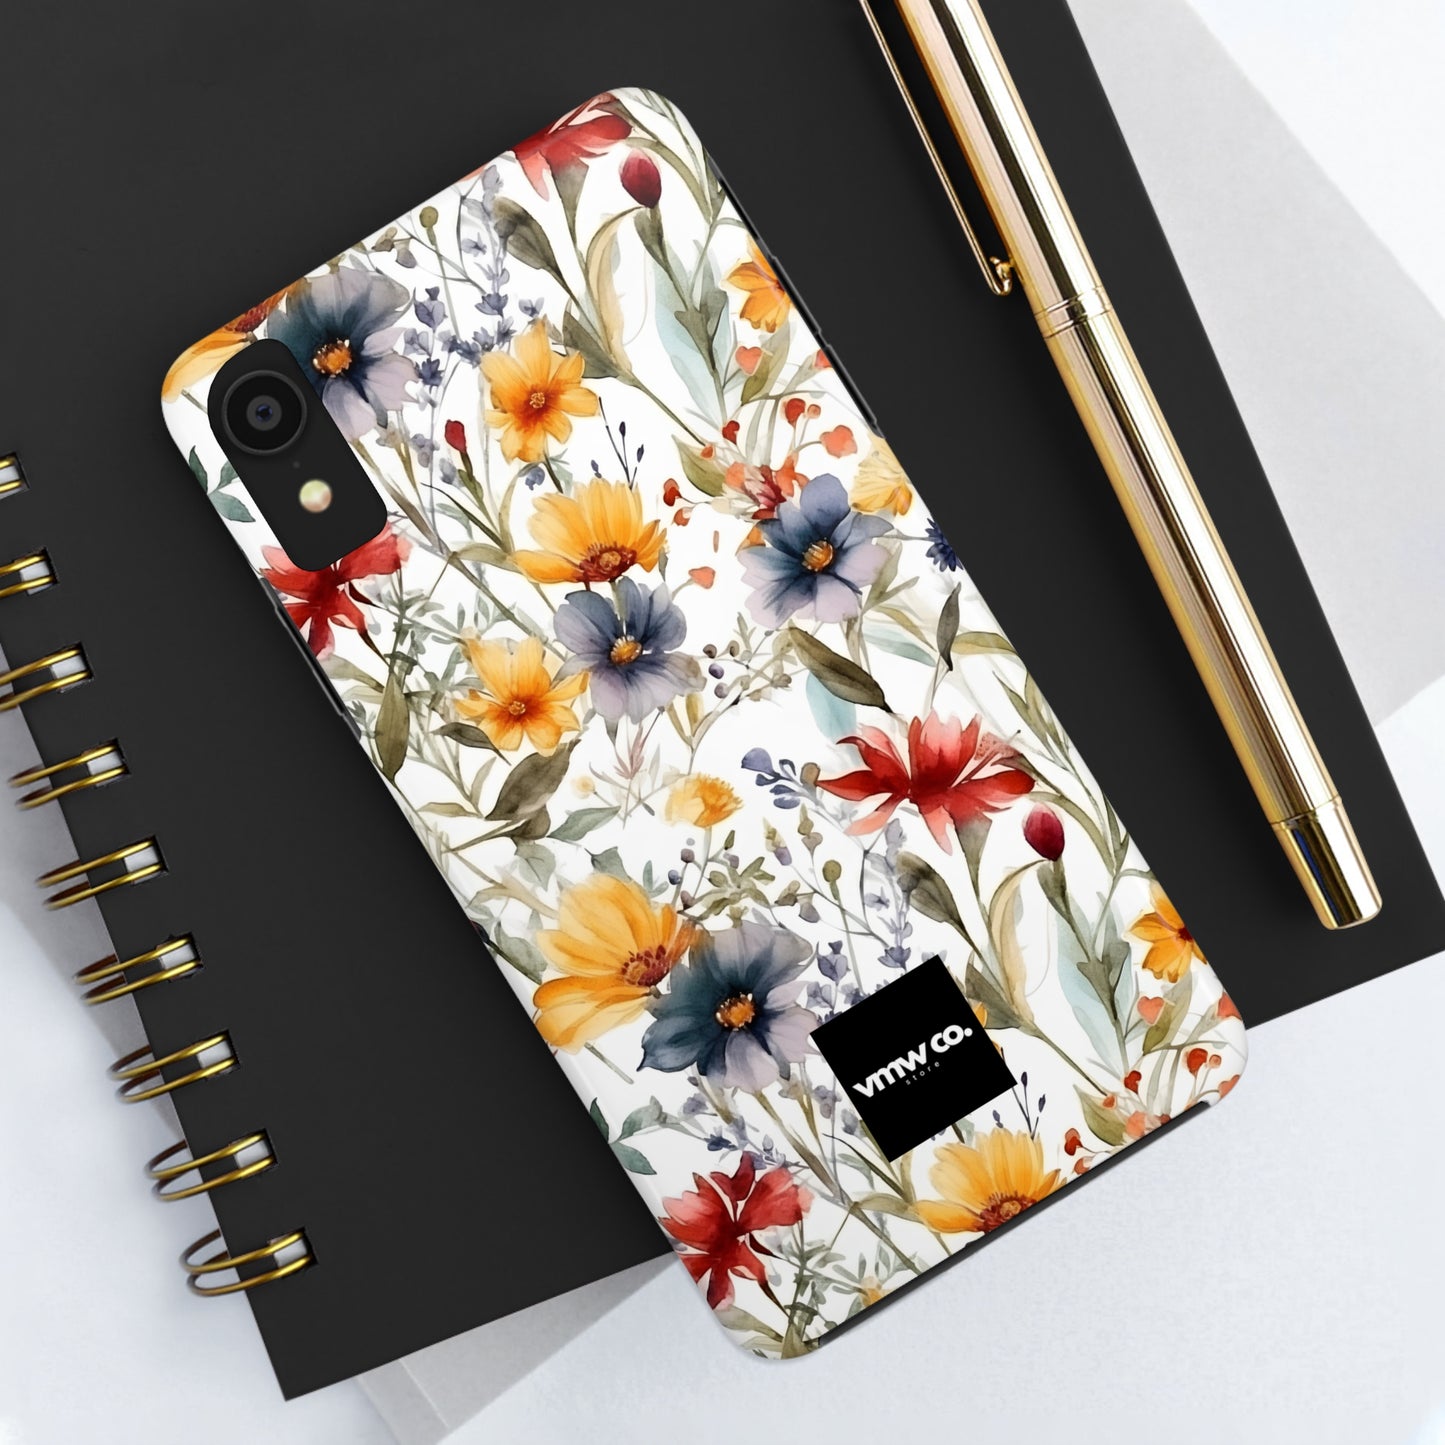 Meadow Medley iPhone Tough Phone Cases